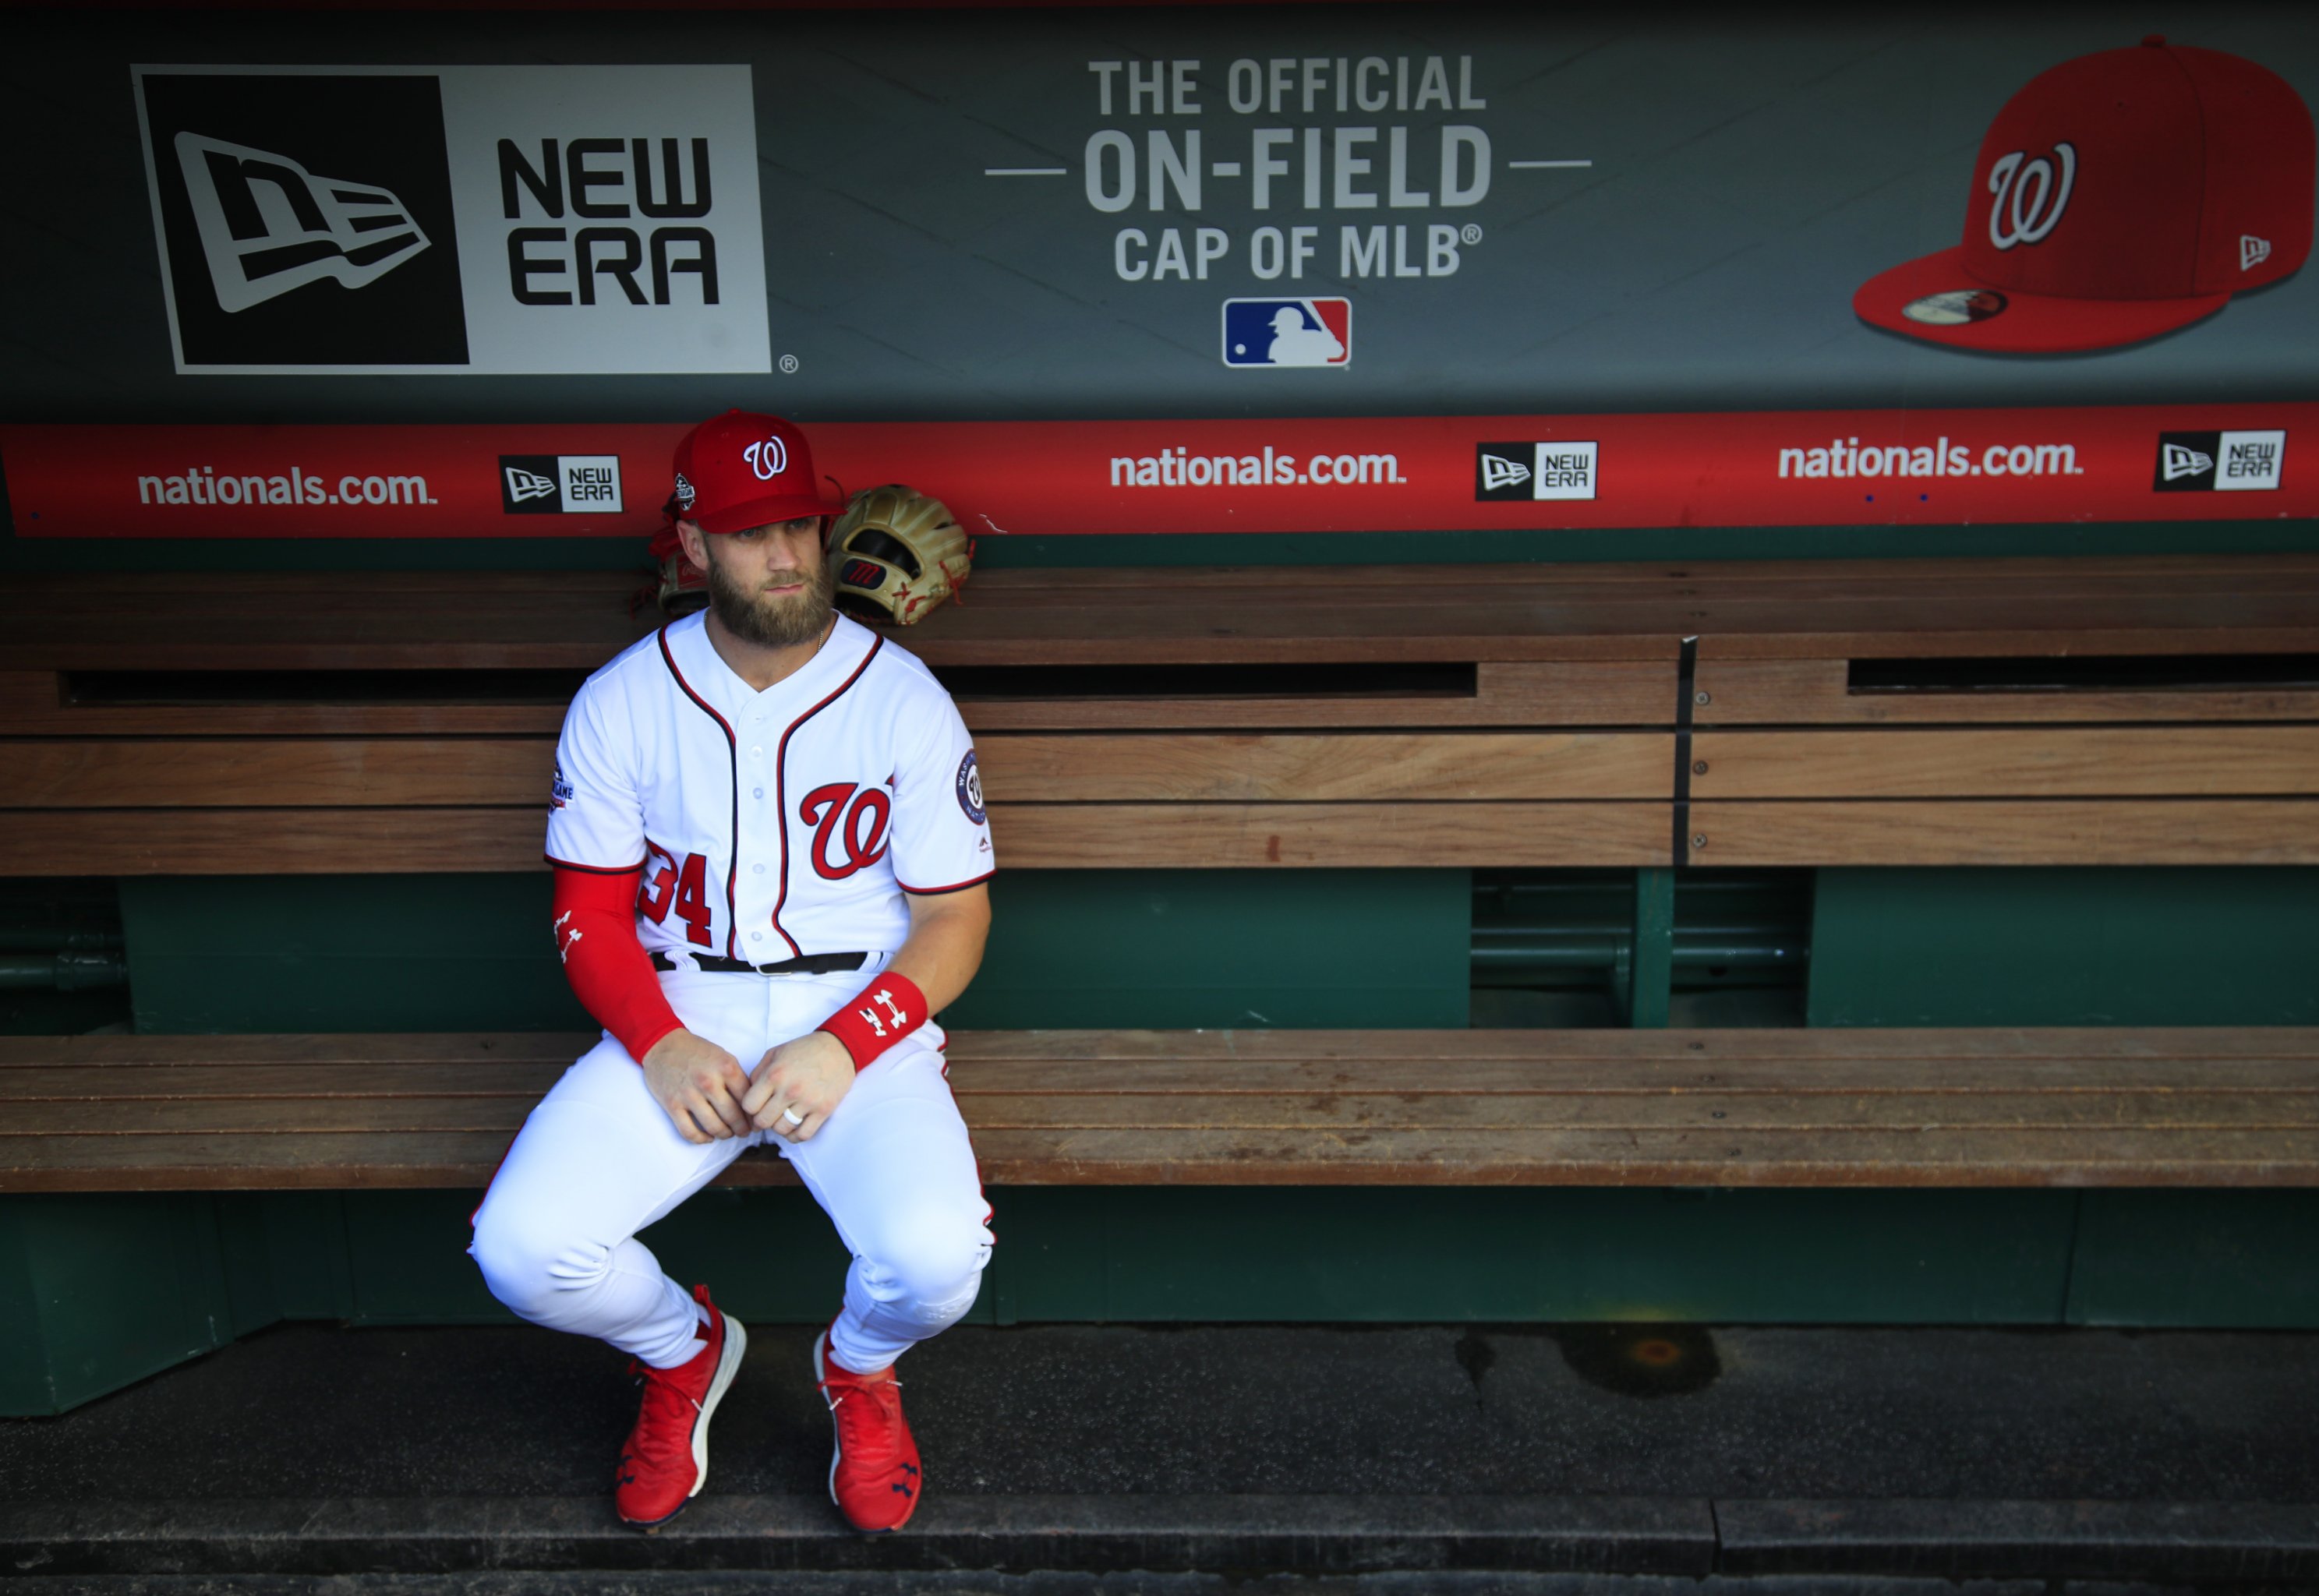 Why Washington Nationals' Bryce Harper shouldn't be stealing